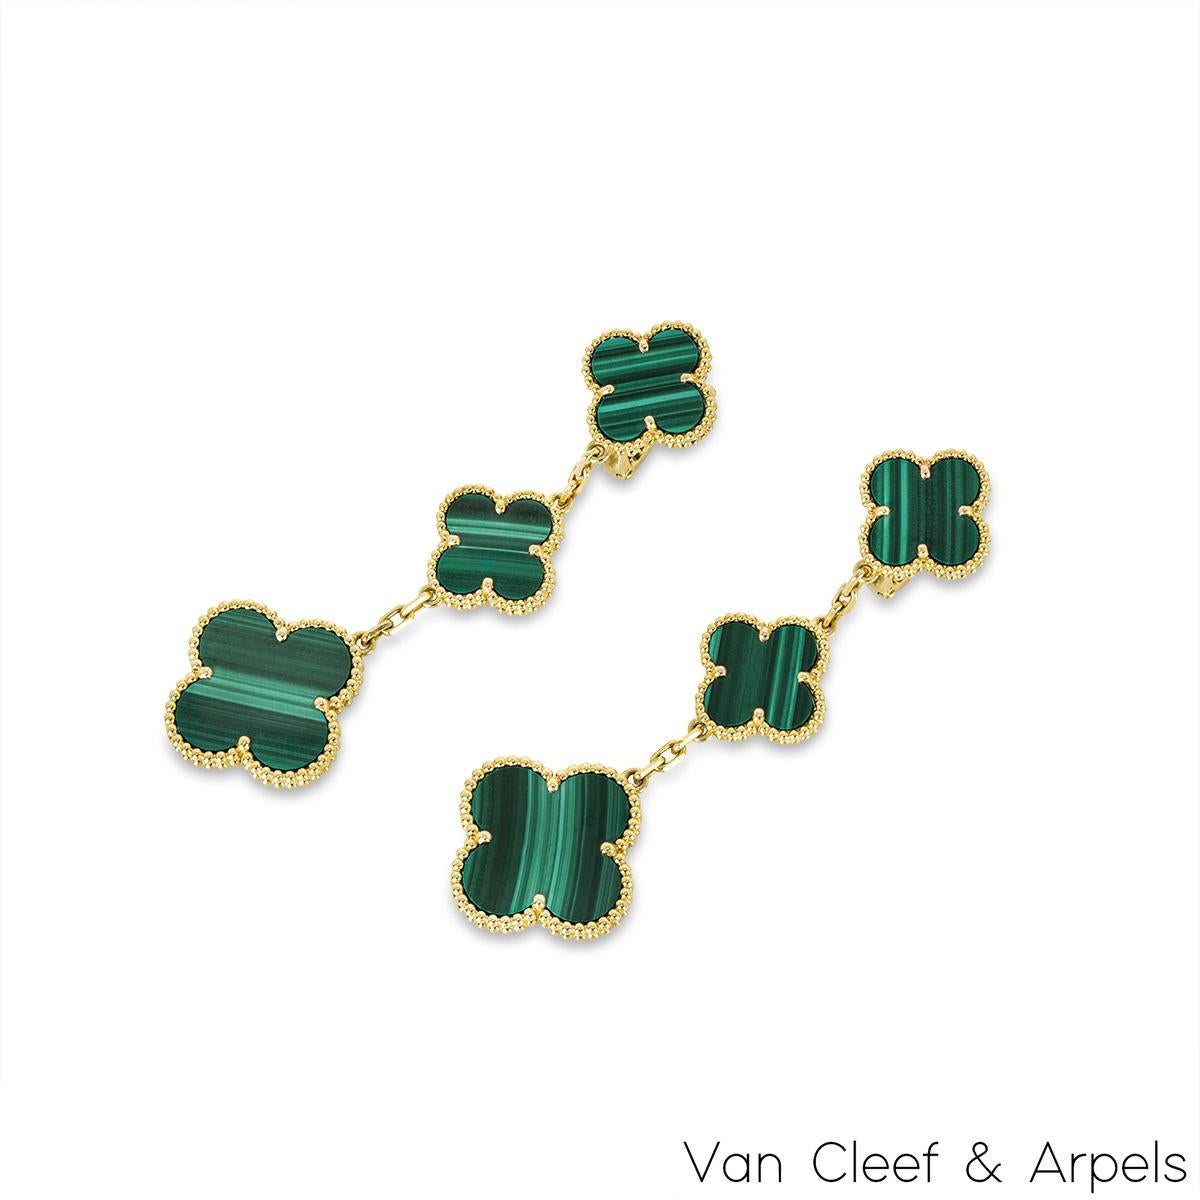 A marvellous pair of 18k yellow gold earrings by Van Cleef & Arpels from the Magic Alhambra collection. The earrings comprise of 3 four leaf clover motifs alternating in size complimented by a beaded outer edge each individually set with malachite